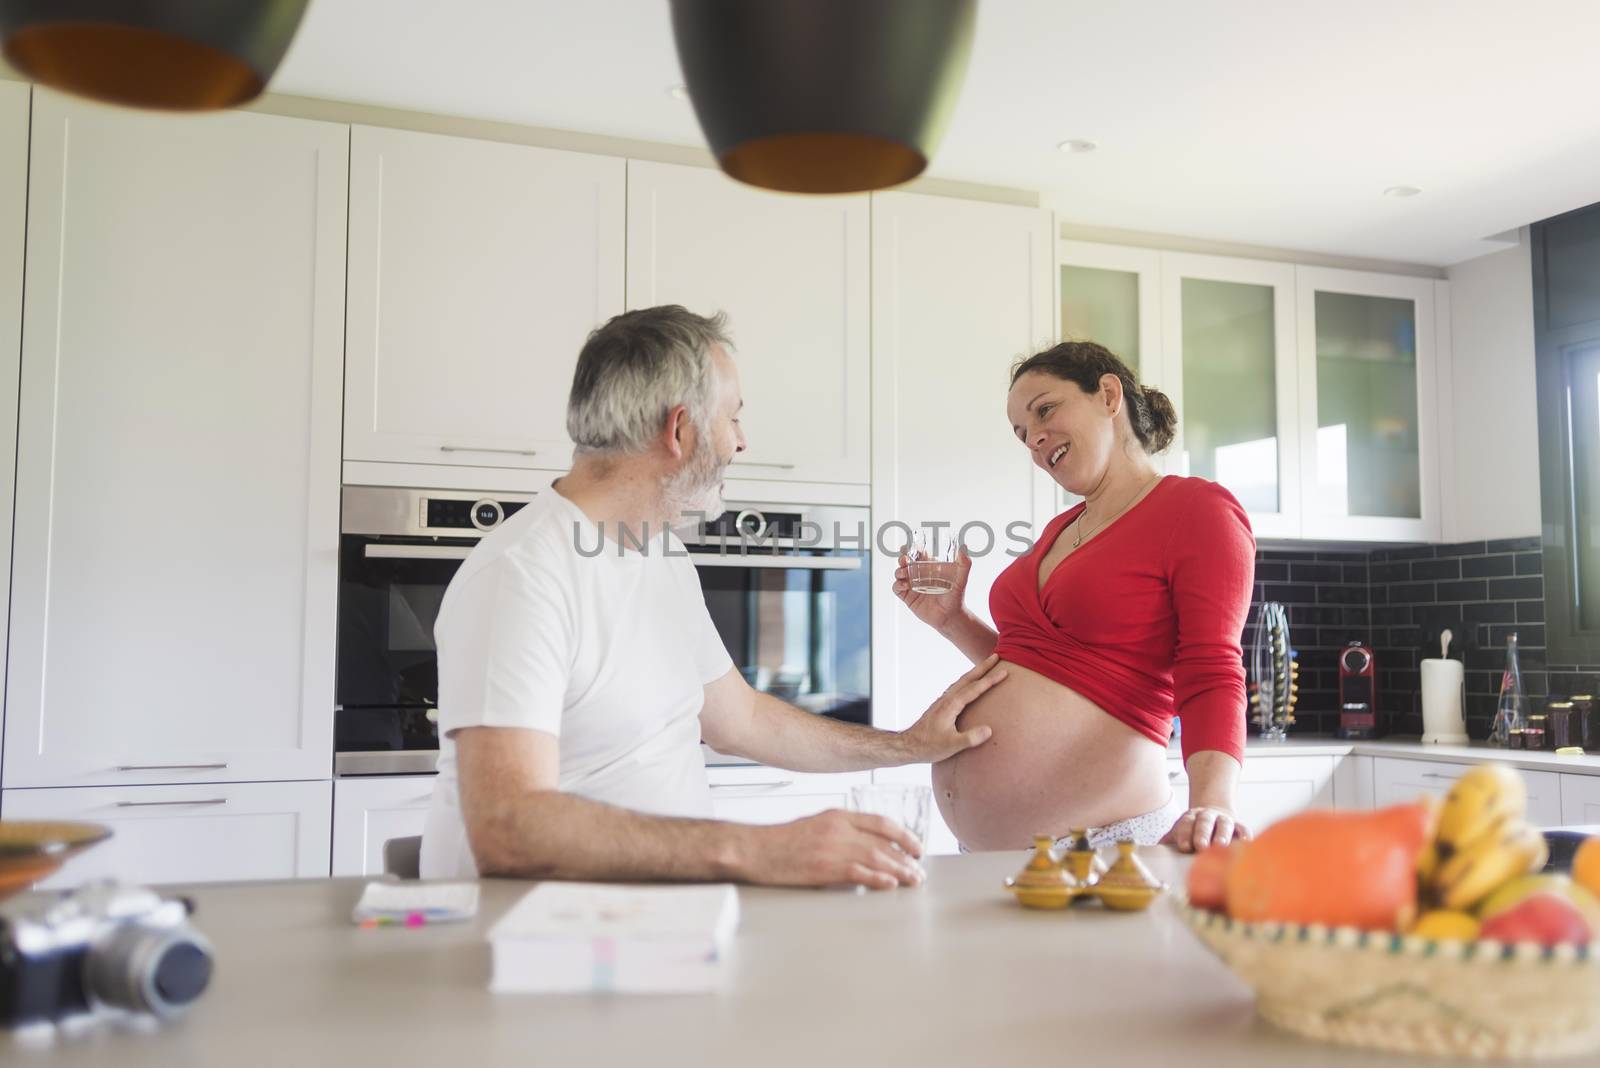 Portrait of smiling laughing white Caucasian couple two people, pregnant woman with husband in the kitchen, lifestyle healthy pregnancy happy life concept